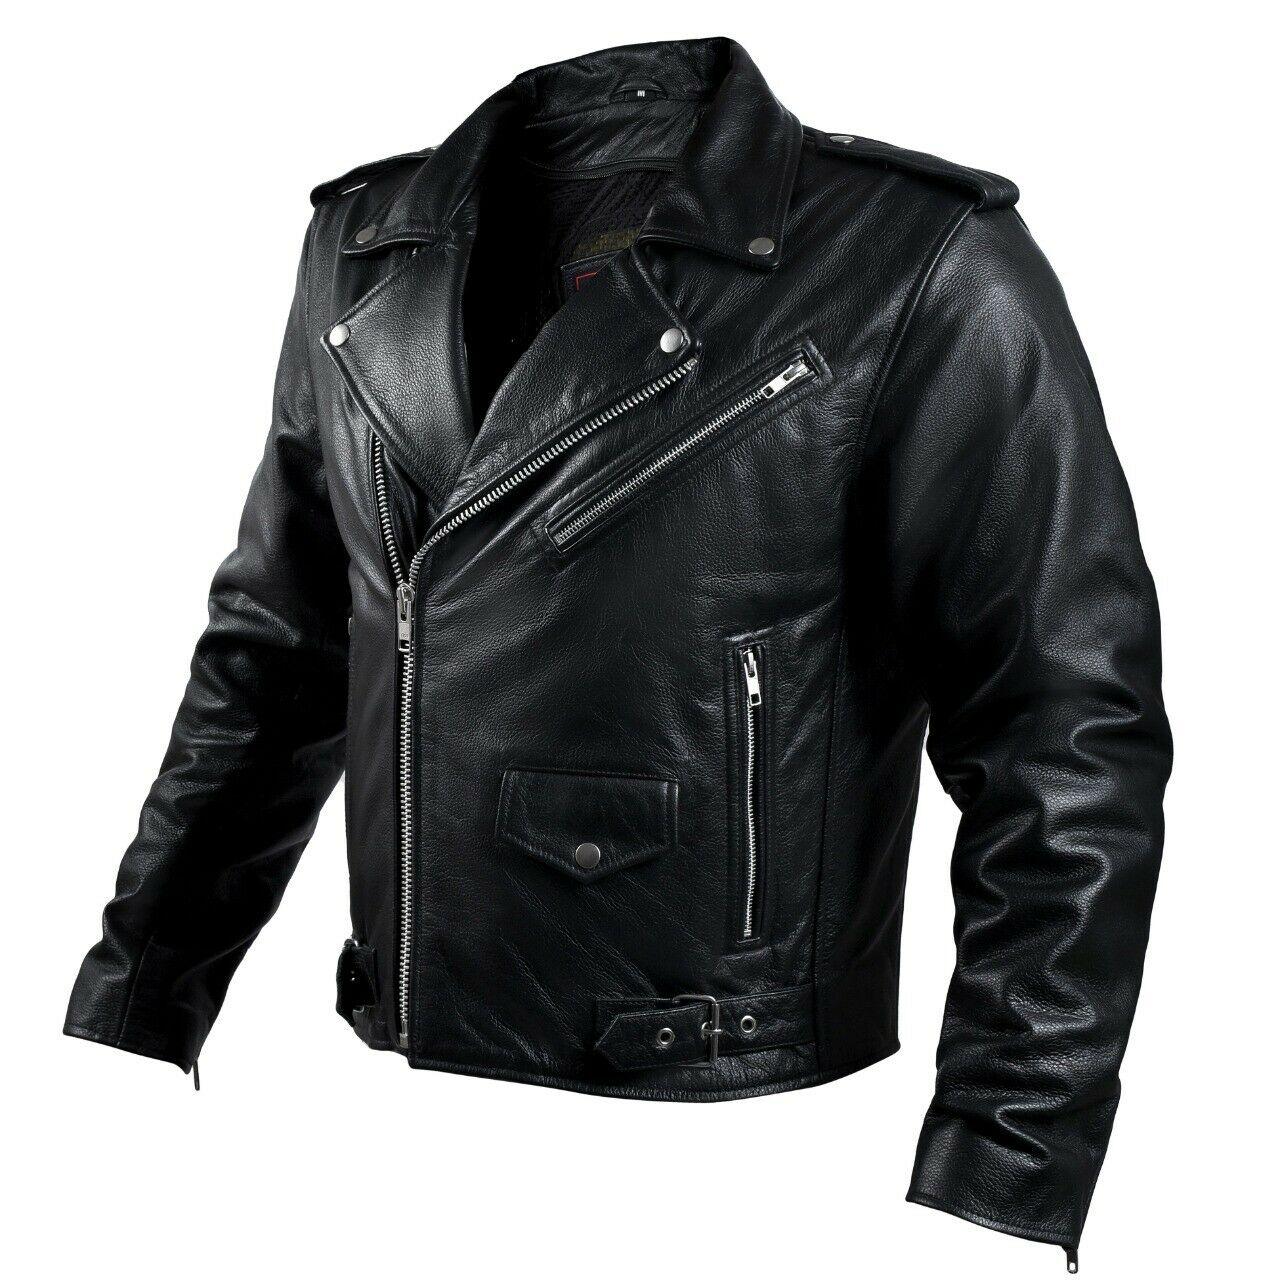 LEATHER ARMOR BIKER MOTORCYCLE JACKET MEN BRANDO CAFE RACER DUAL SPORTS RIDING - Moto Life Products